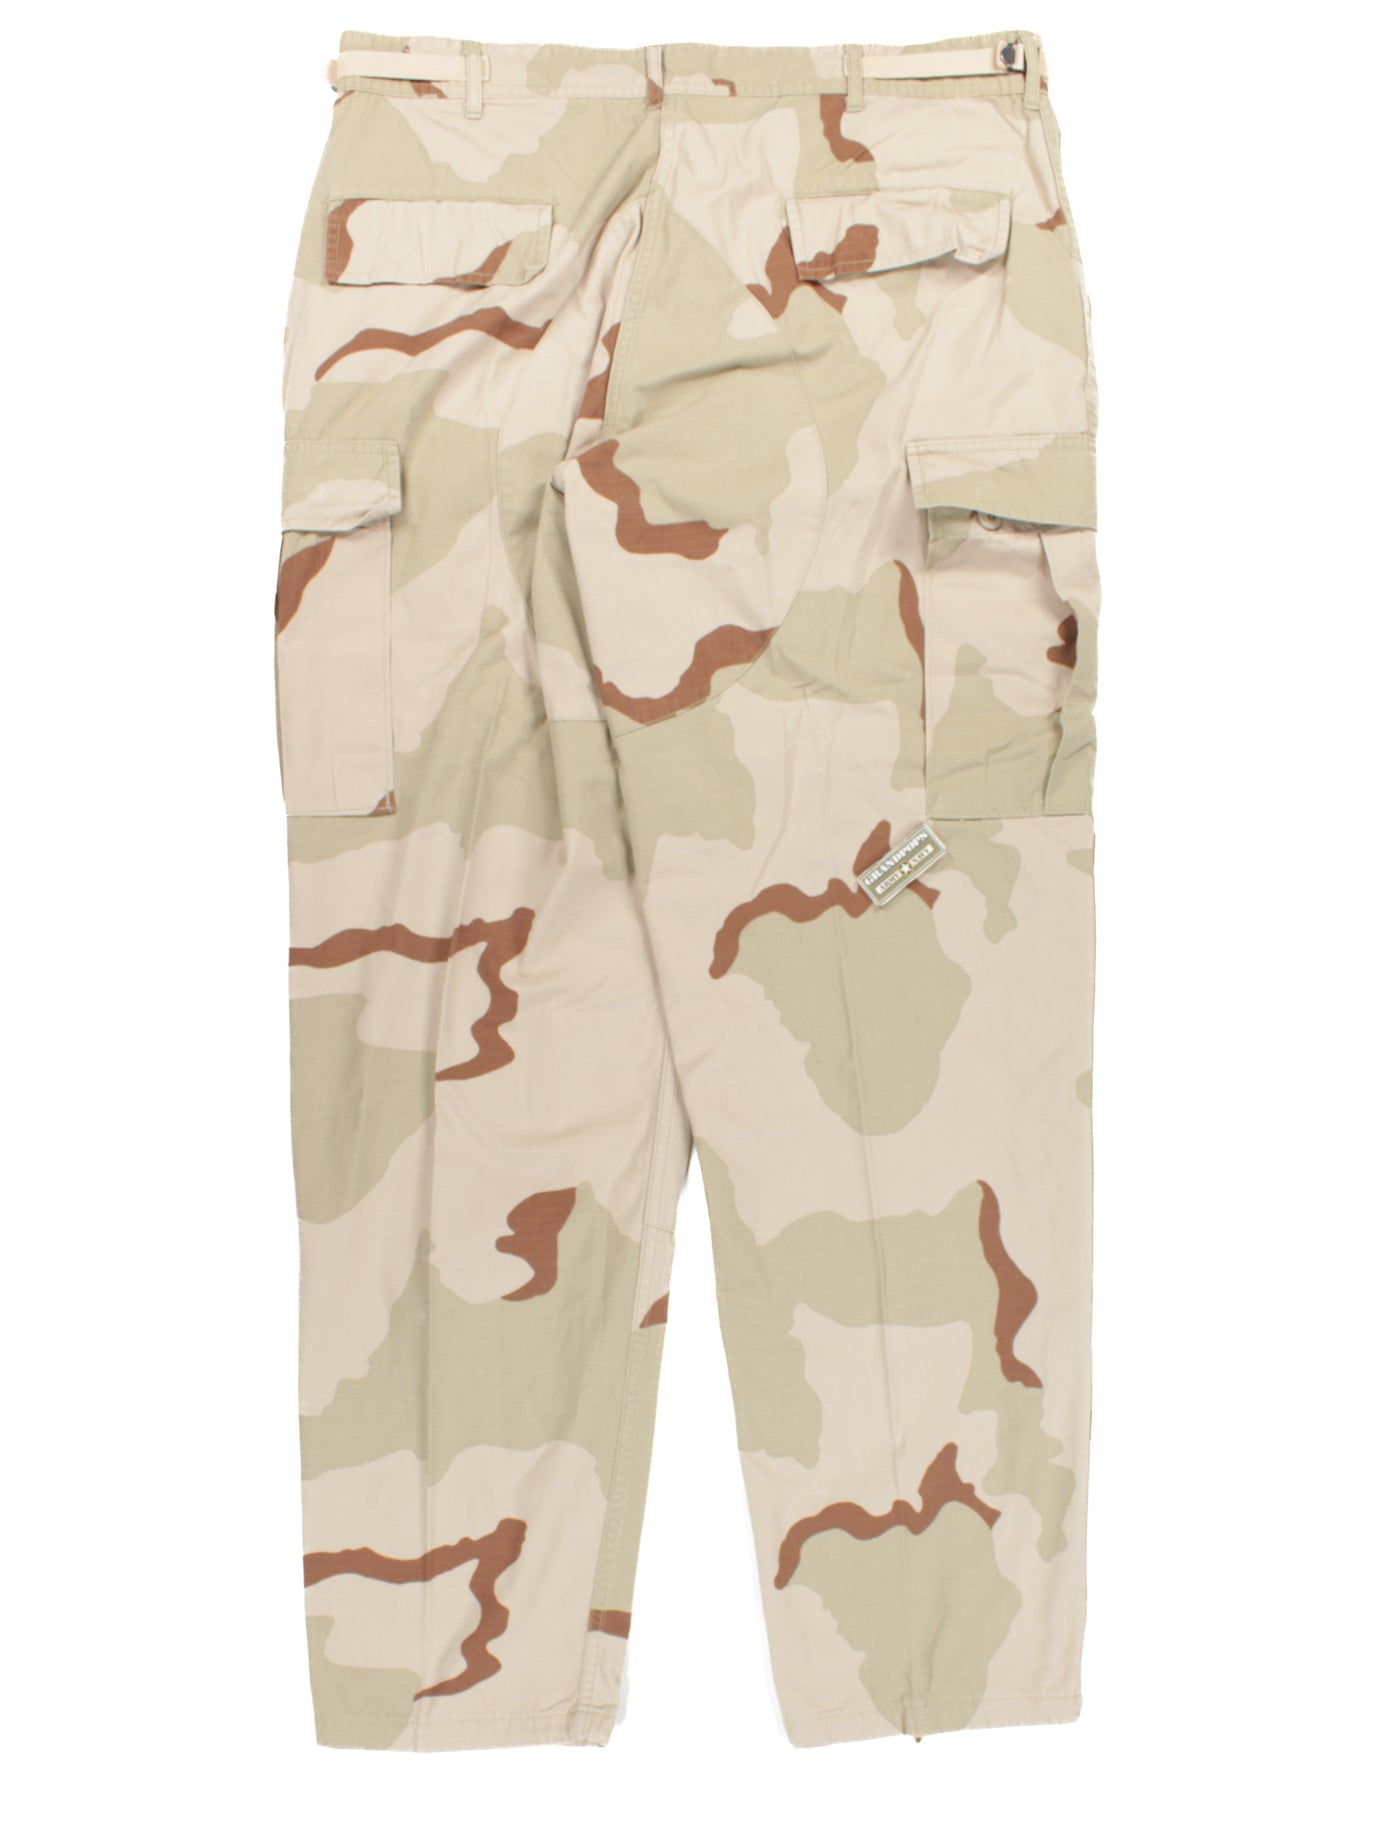 USGI MILITARY ISSUE 3 COLOR DESERT CAMO BDU DCU TROUSERS PANTS TWILL NEW